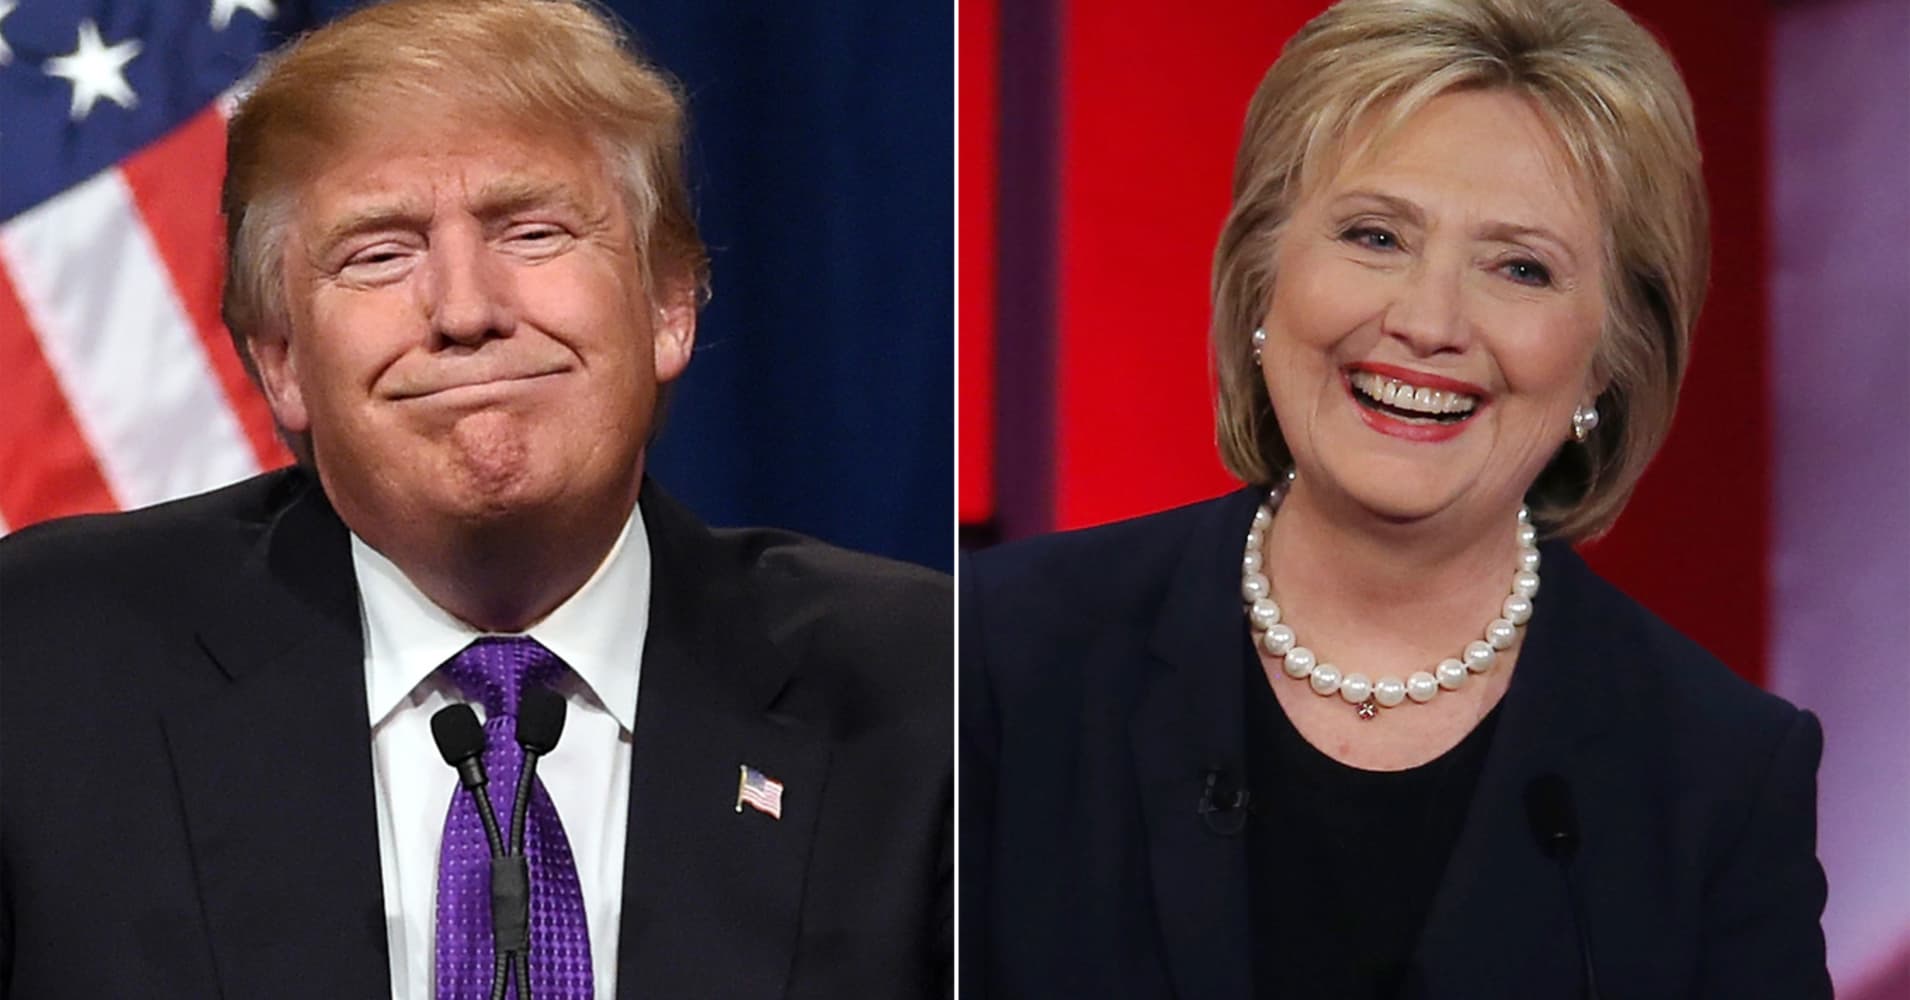 Trump vs. Clinton: The election no one wants-—commentary